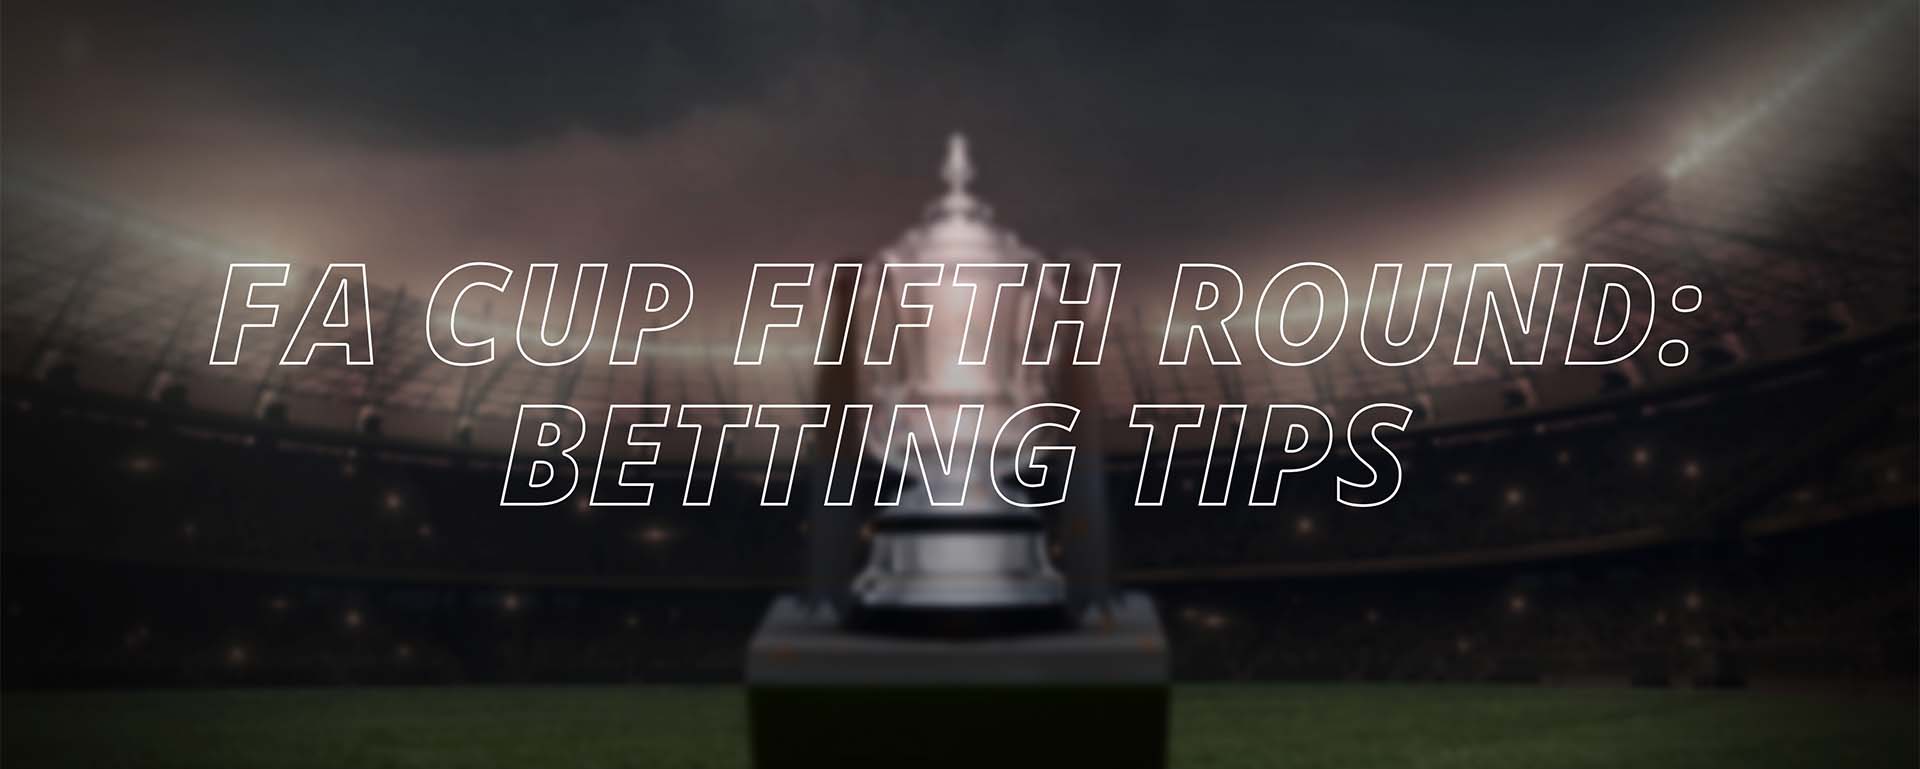 FA CUP FIFTH ROUND: BETTING TIPS